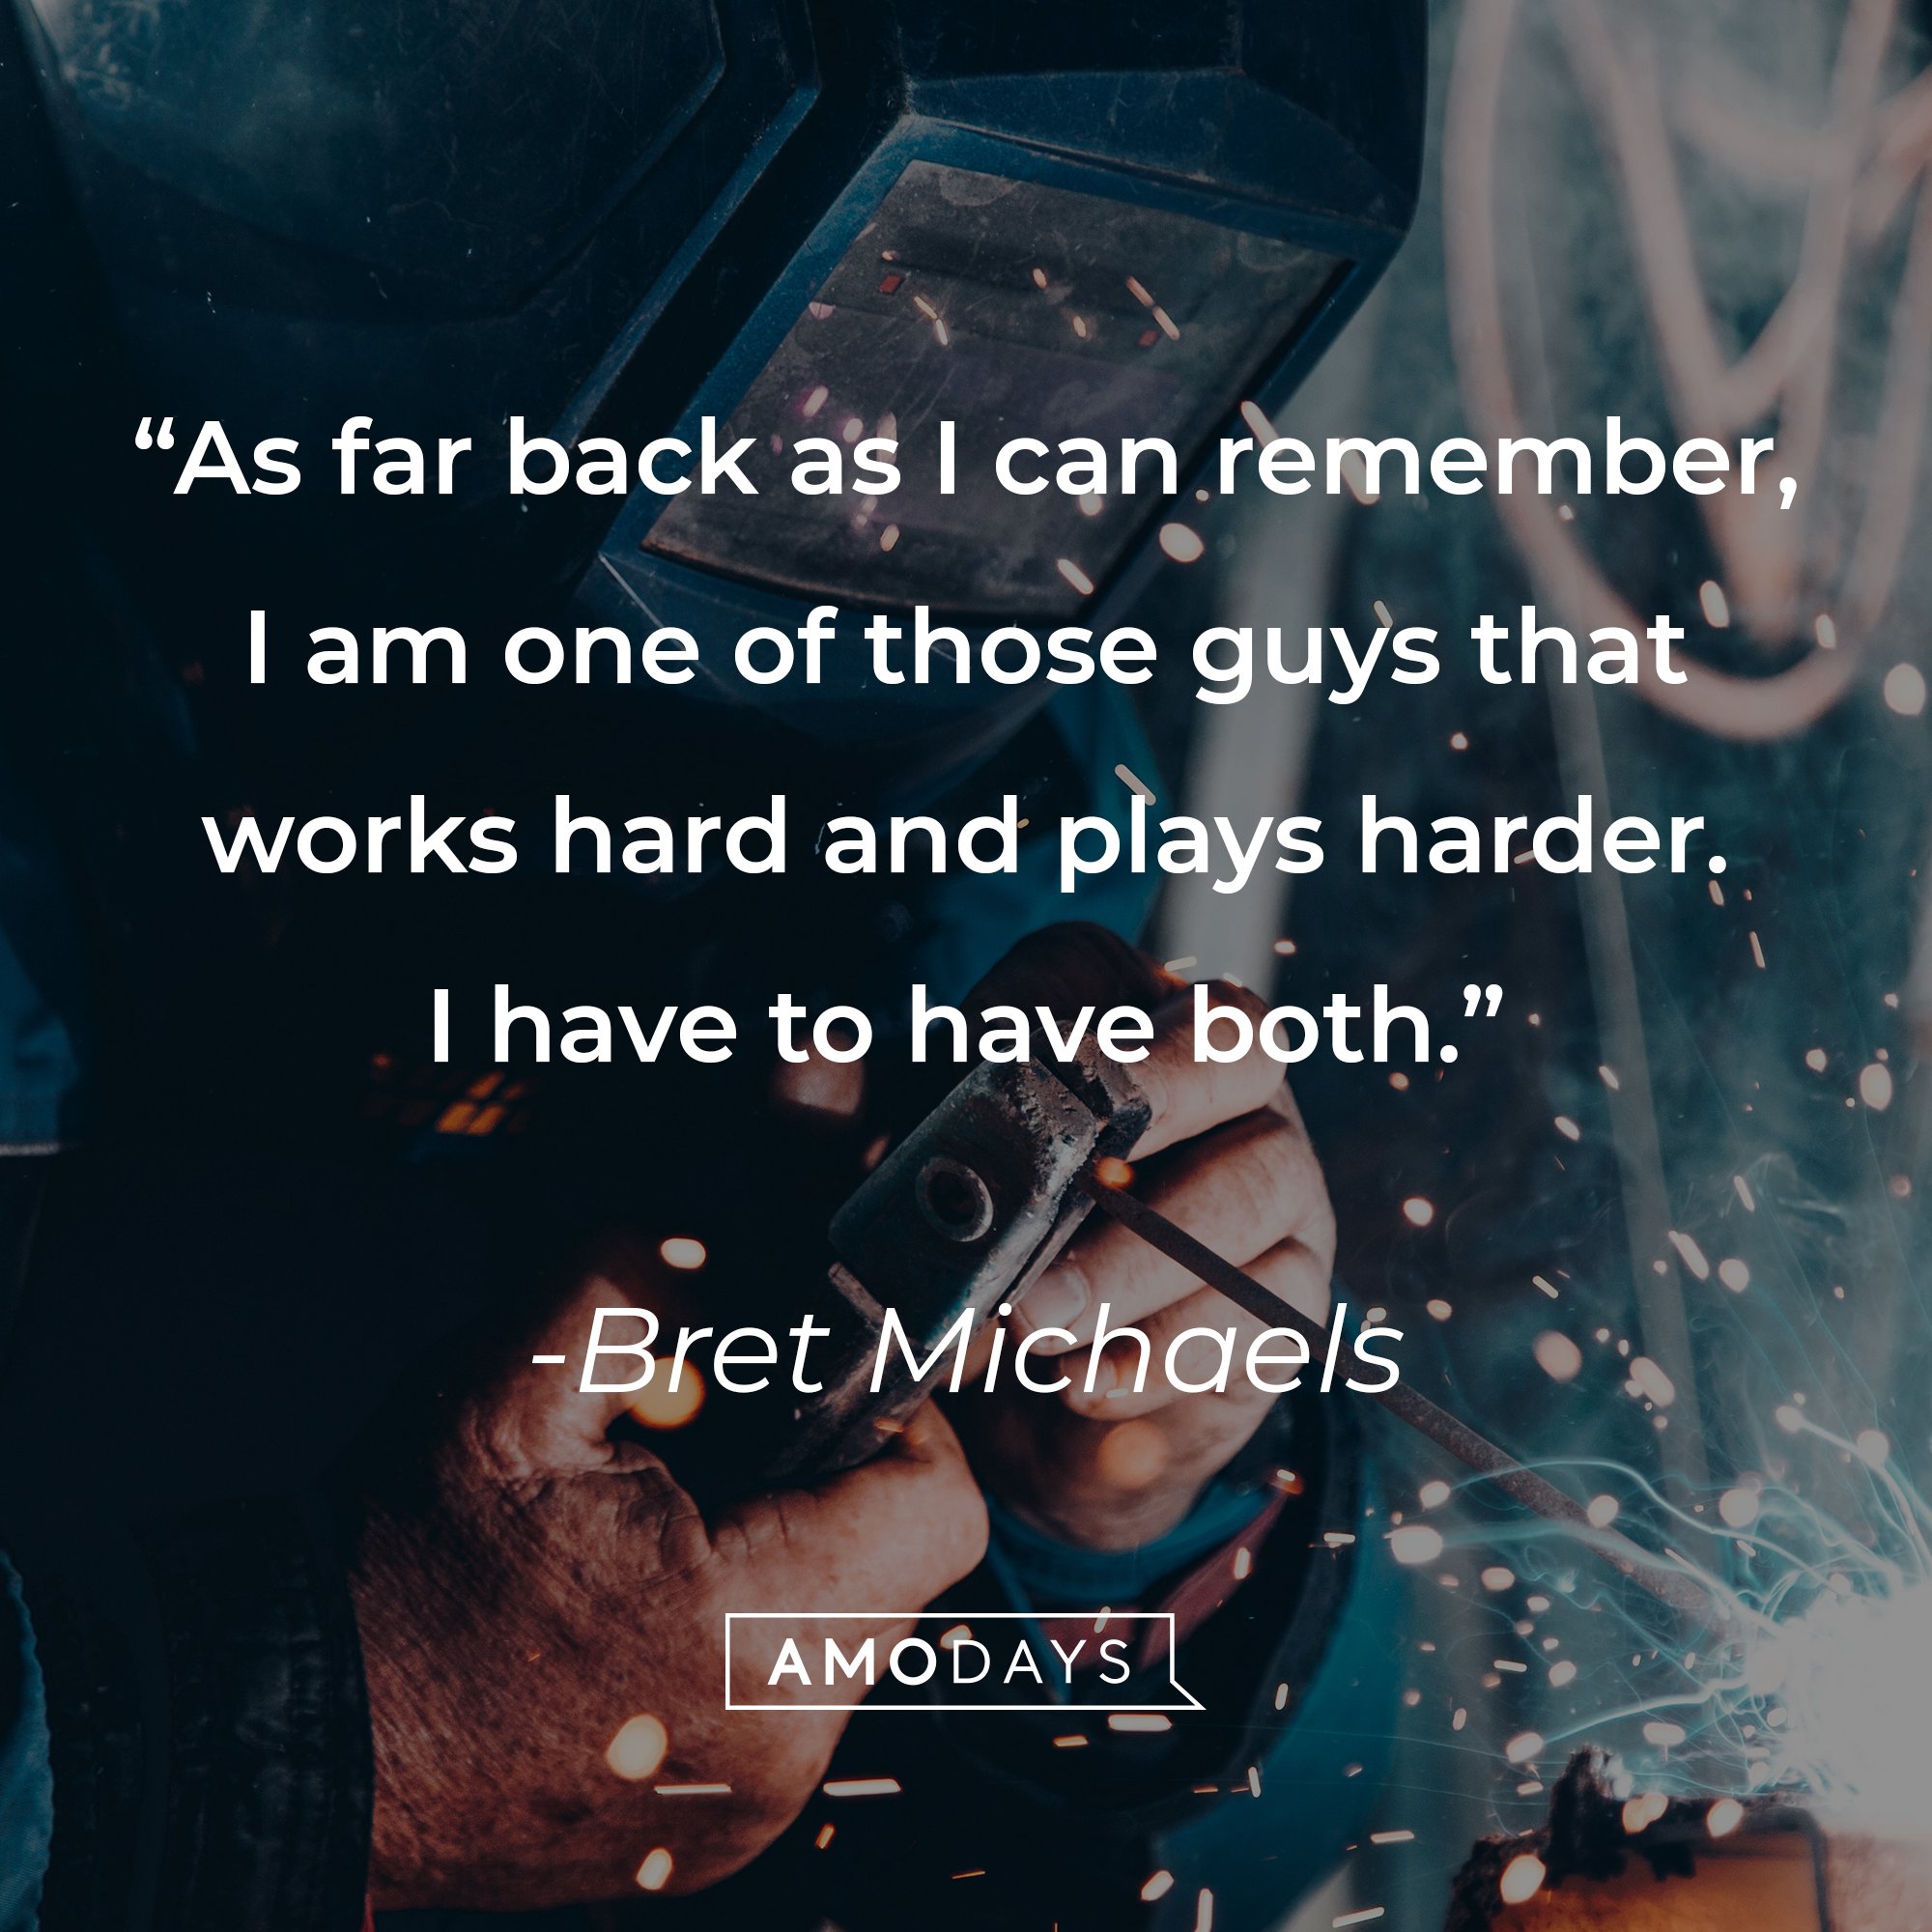 Bret Michaels' quote: "As far back as I can remember, I am one of those guys that works hard and plays harder. I have to have both." | Image: AmoDays